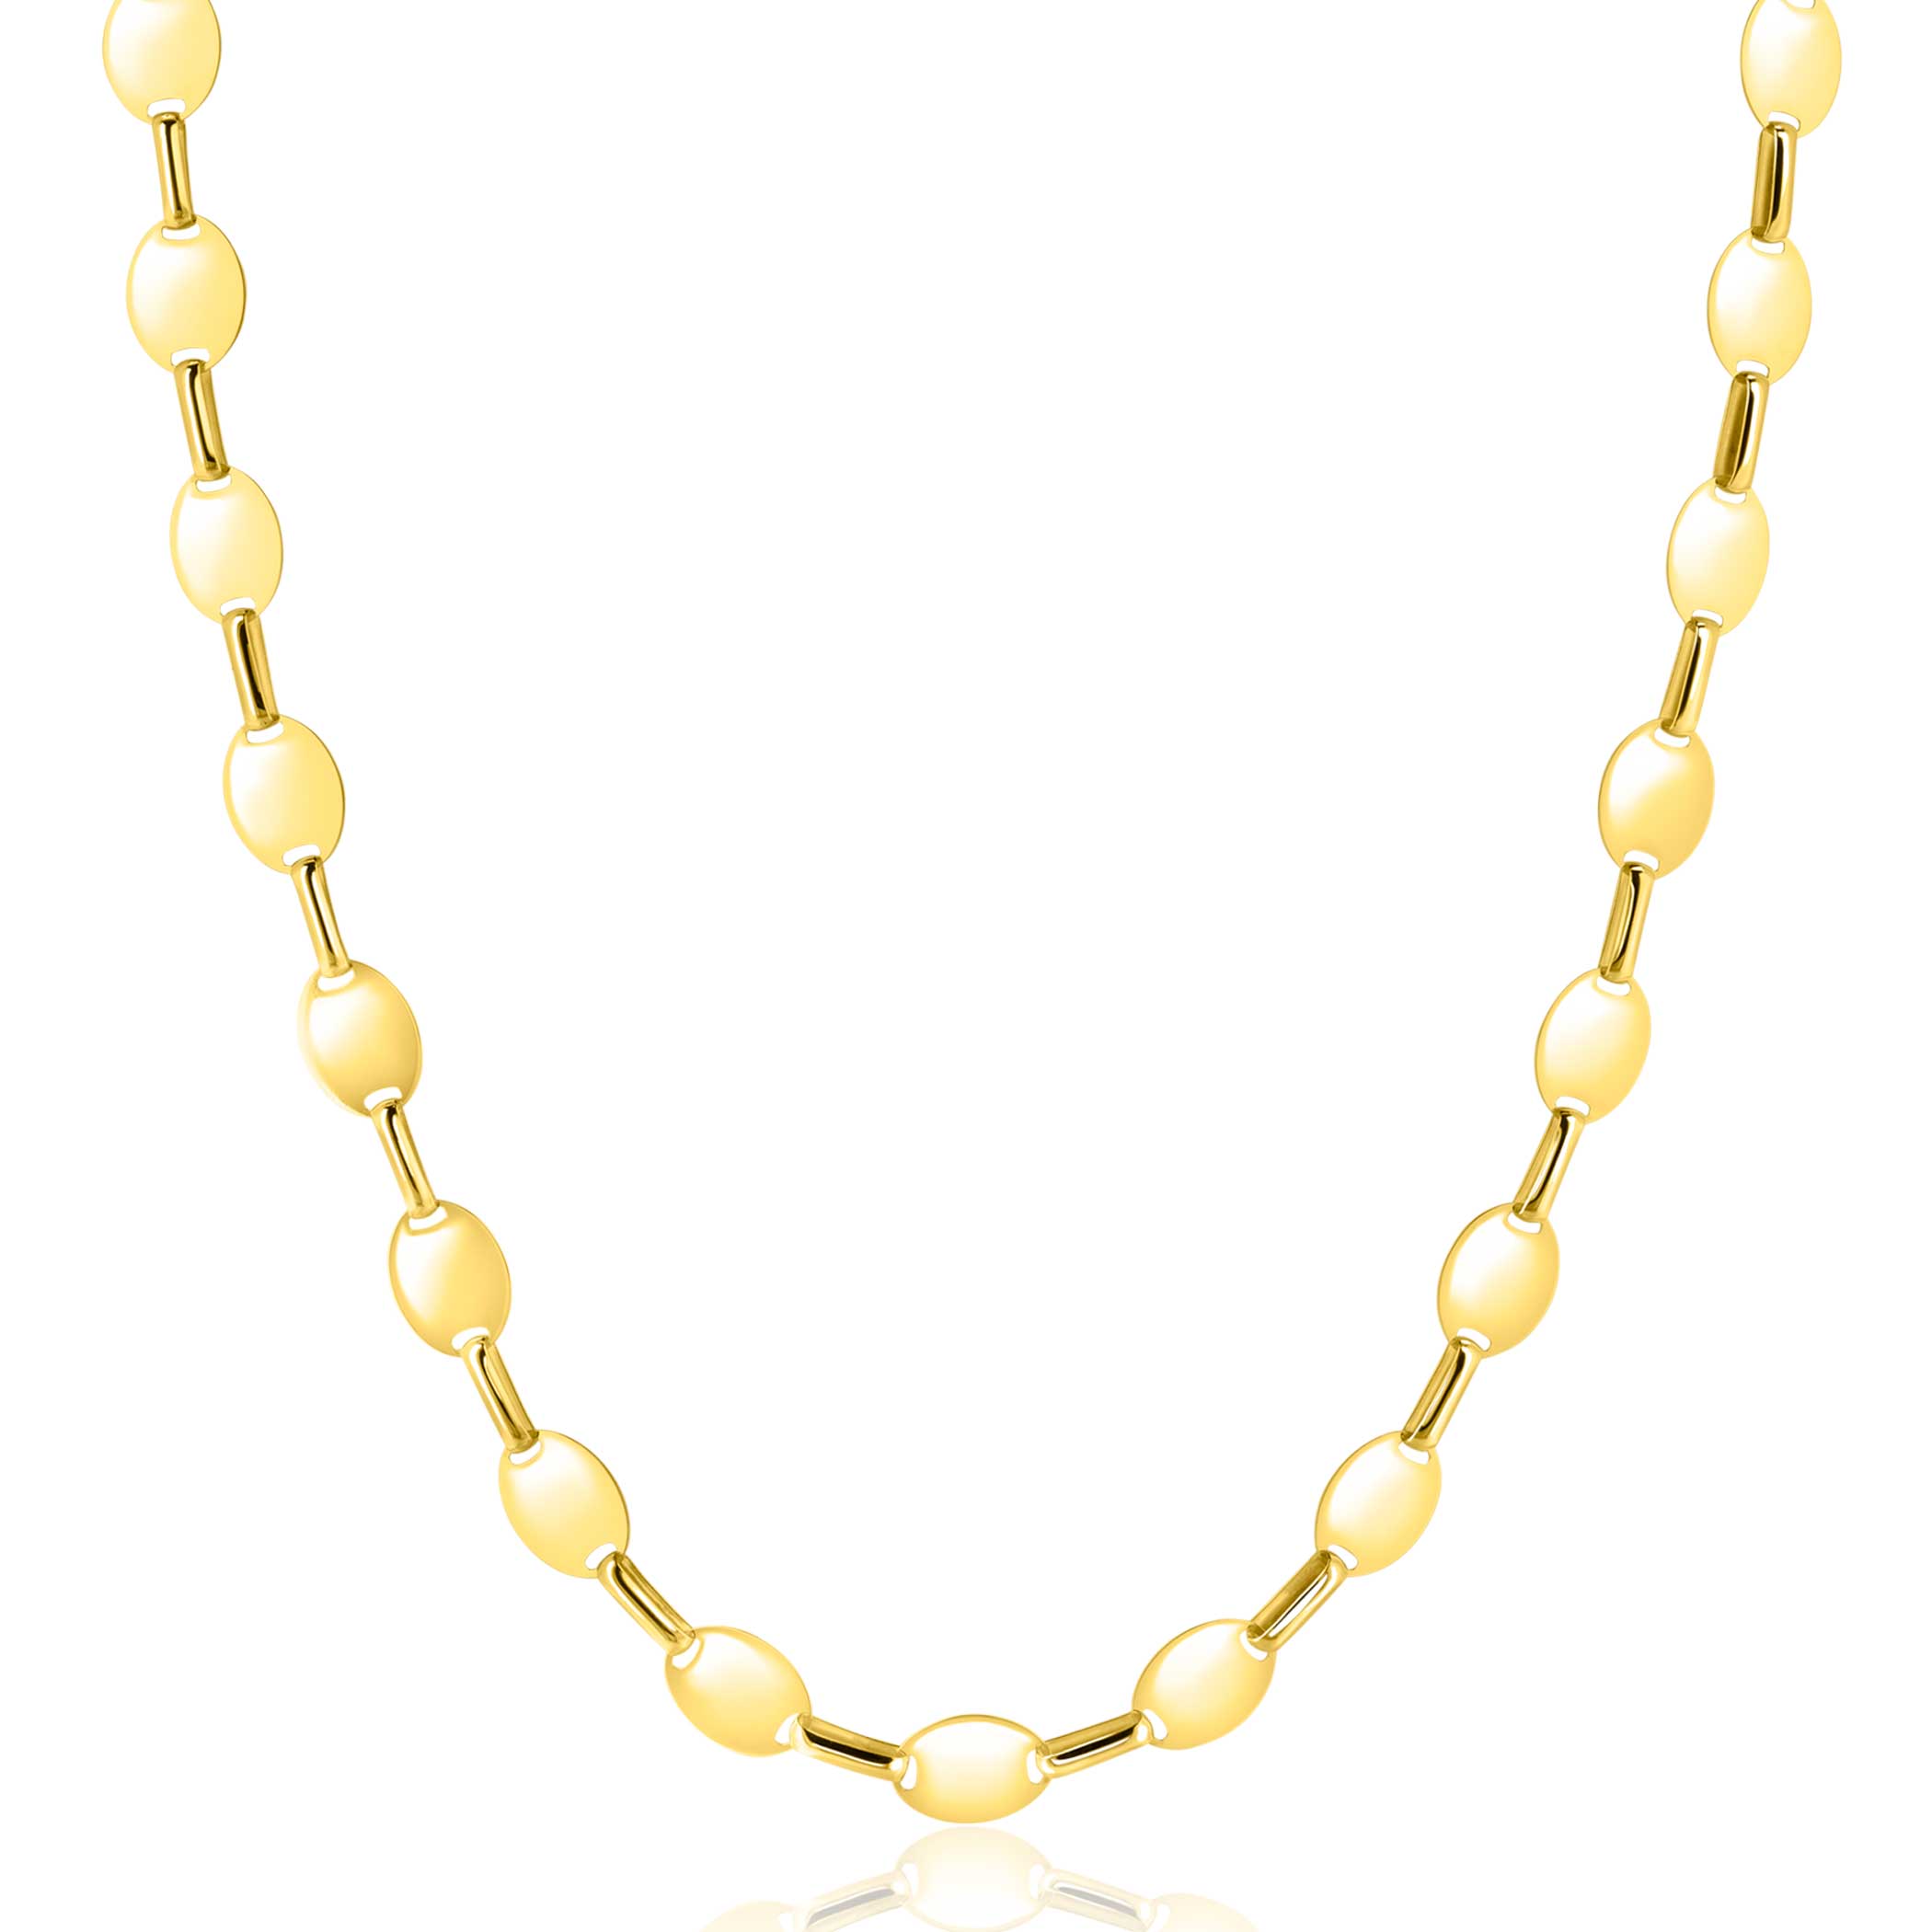 ZINZI Gold 14 karat solid gold link chain necklace with smooth oval plates, 6mm wide, 45cm long ZGC496
